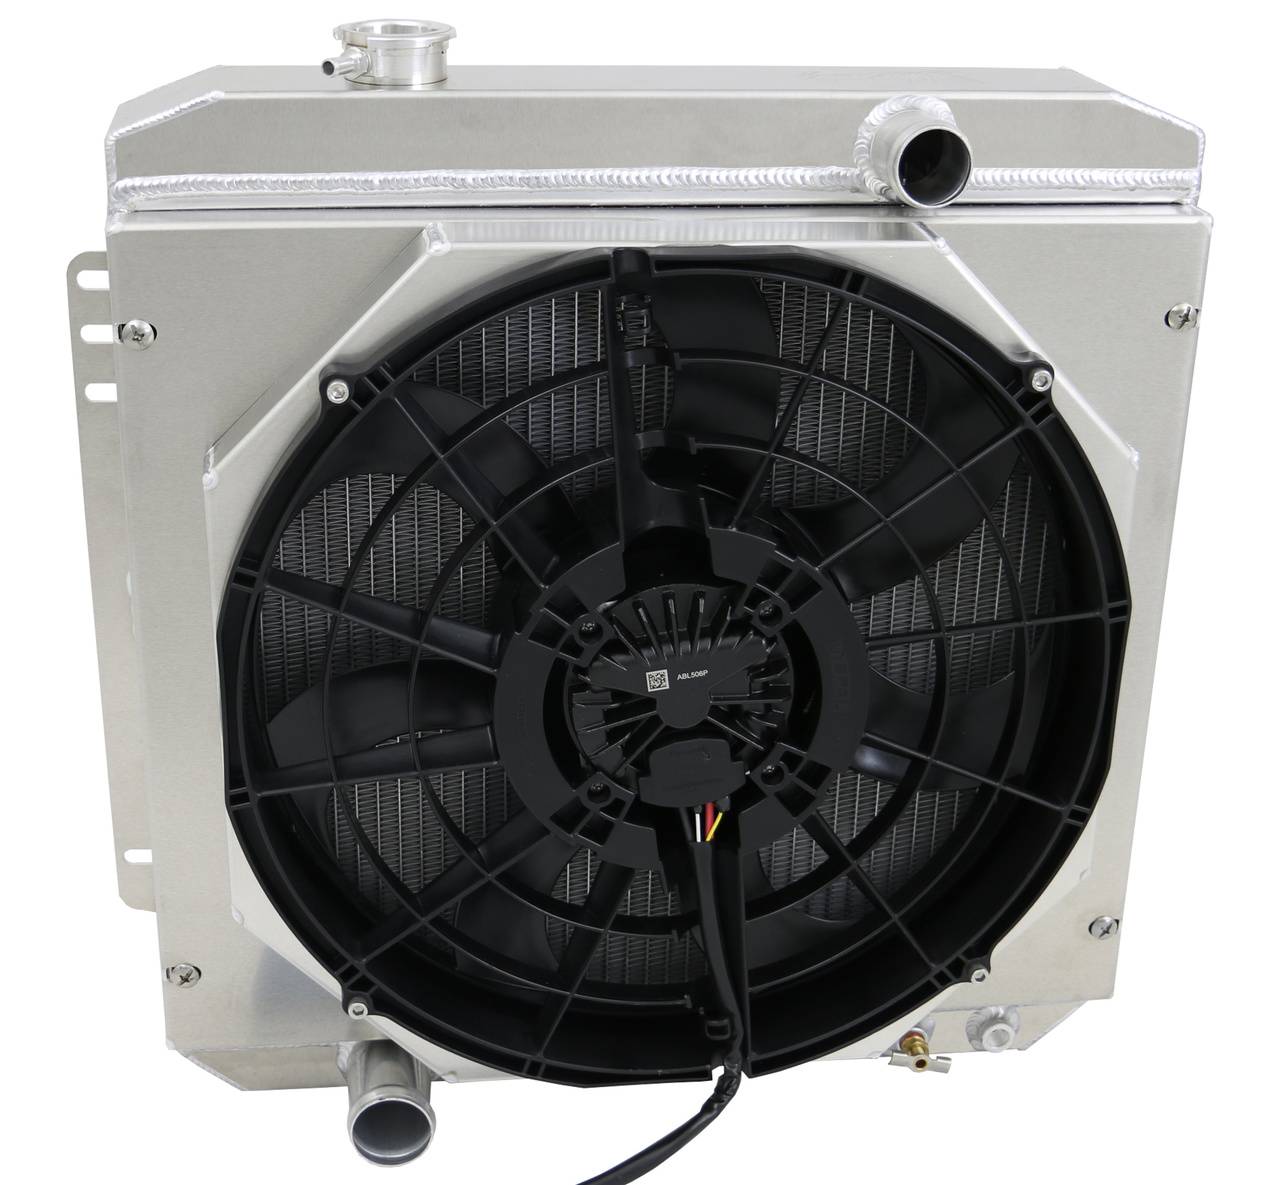 Wizard Cooling Inc - Wizard Cooling - 1962-1968 Ford Fairlane & 1966-70 Falcon Aluminum Radiator W/ Brushless Fan Shroud - 260-118BL